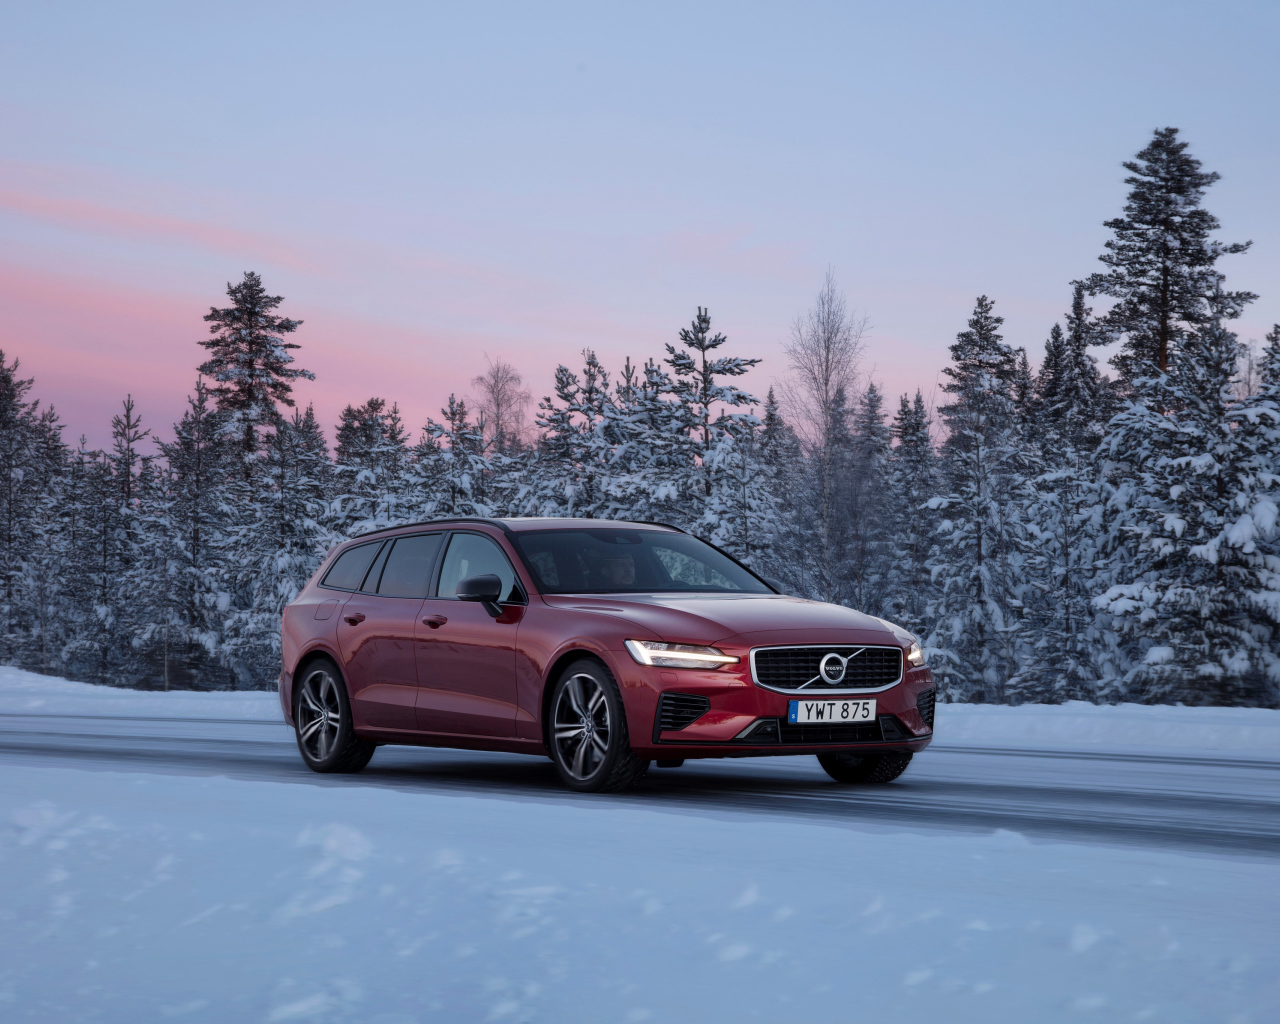 Red Volvo V60 car on a winter road